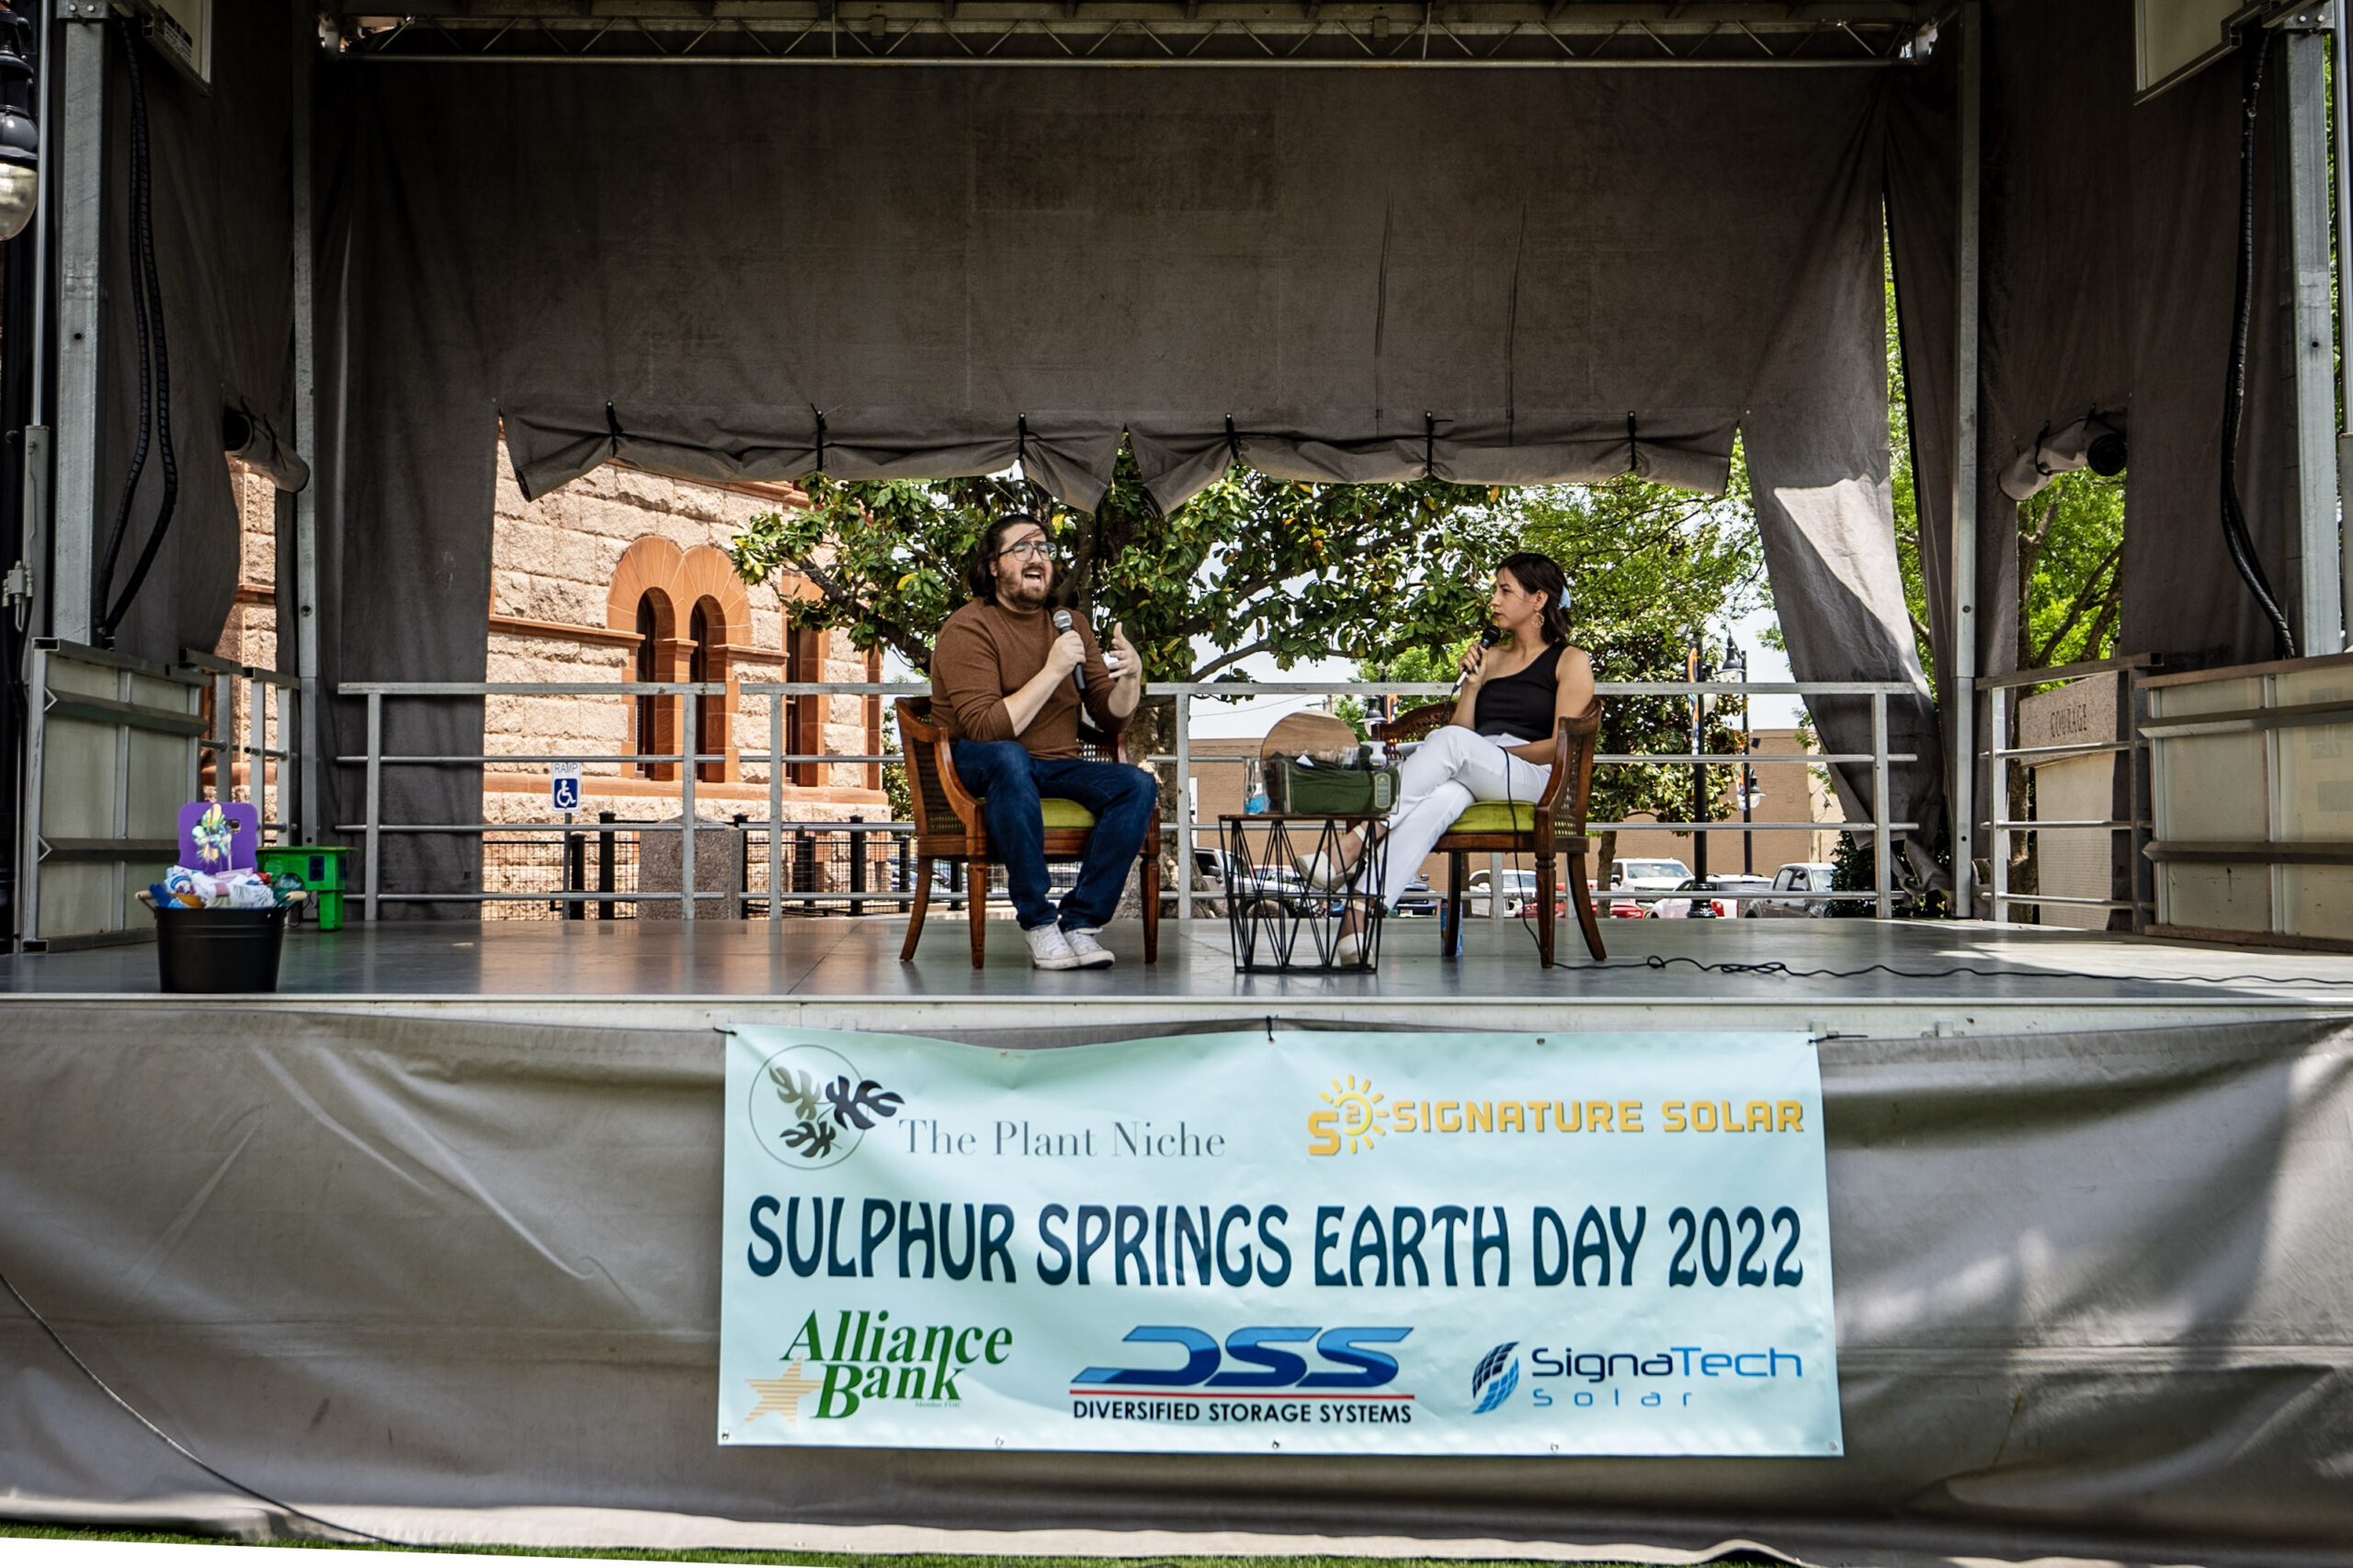 Earth Day 2022 with The Plant Niche